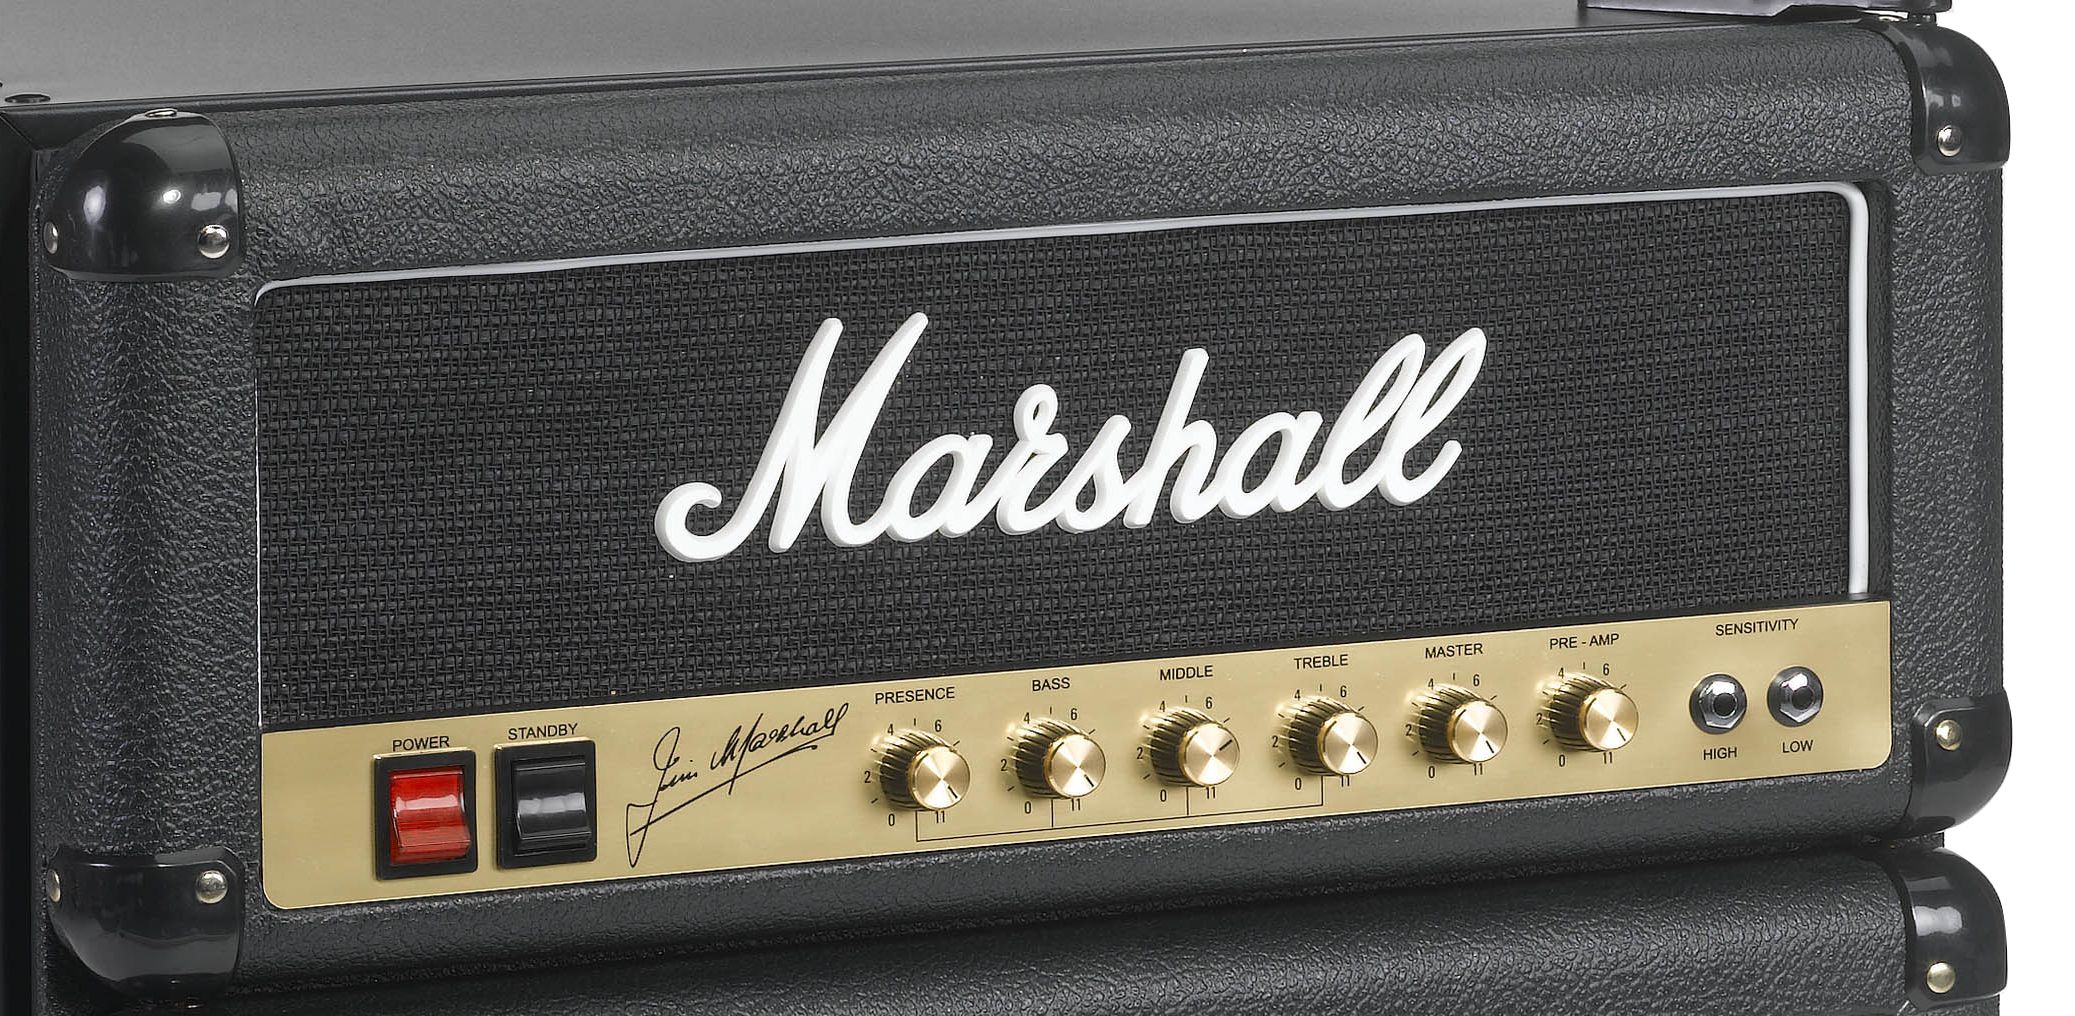 File:Marshall Fridge - with snare drum & cajons (2013-12-13 by